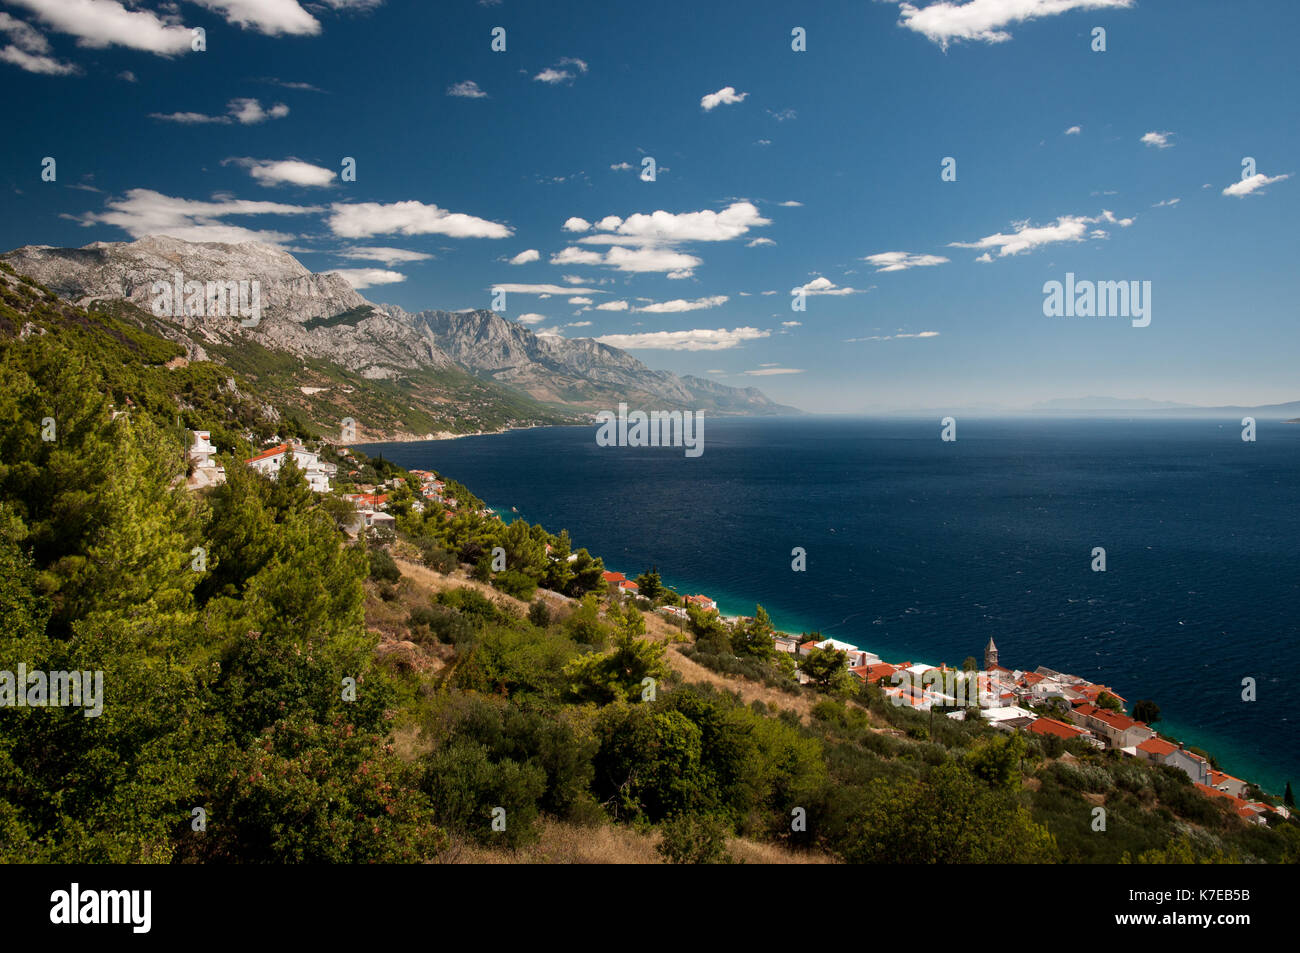 croatia village Pisak on the coast of meer under blue sky with white clouds Stock Photo